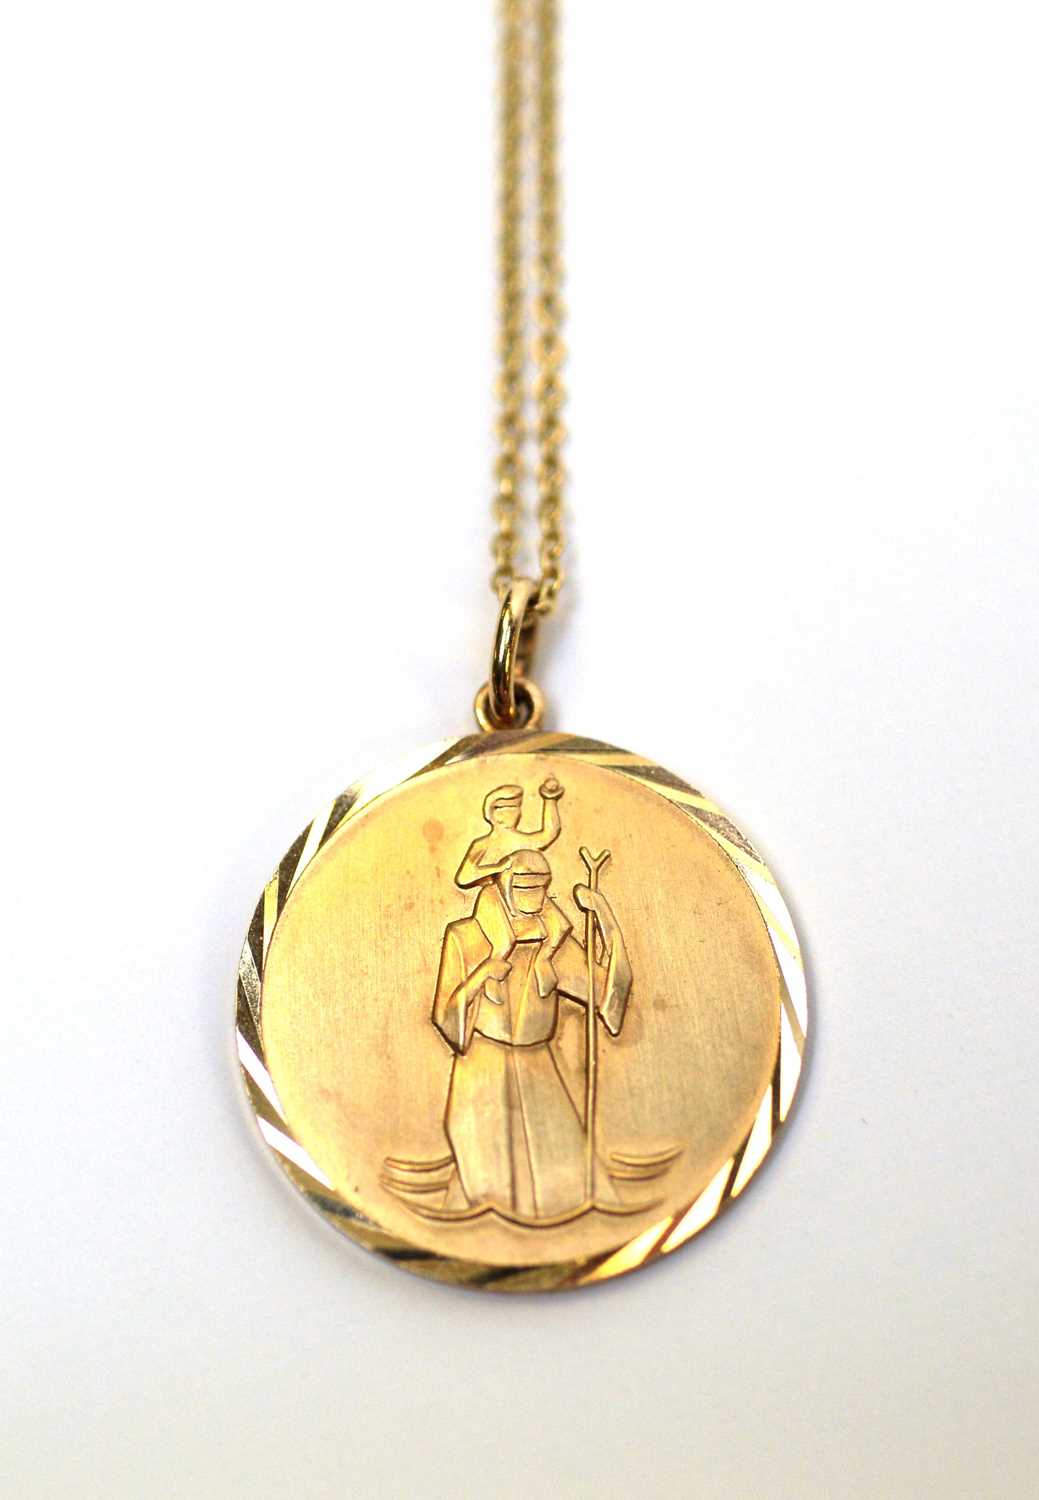 Lot 6 - A 9ct gold St. Christopher pendant on chain.